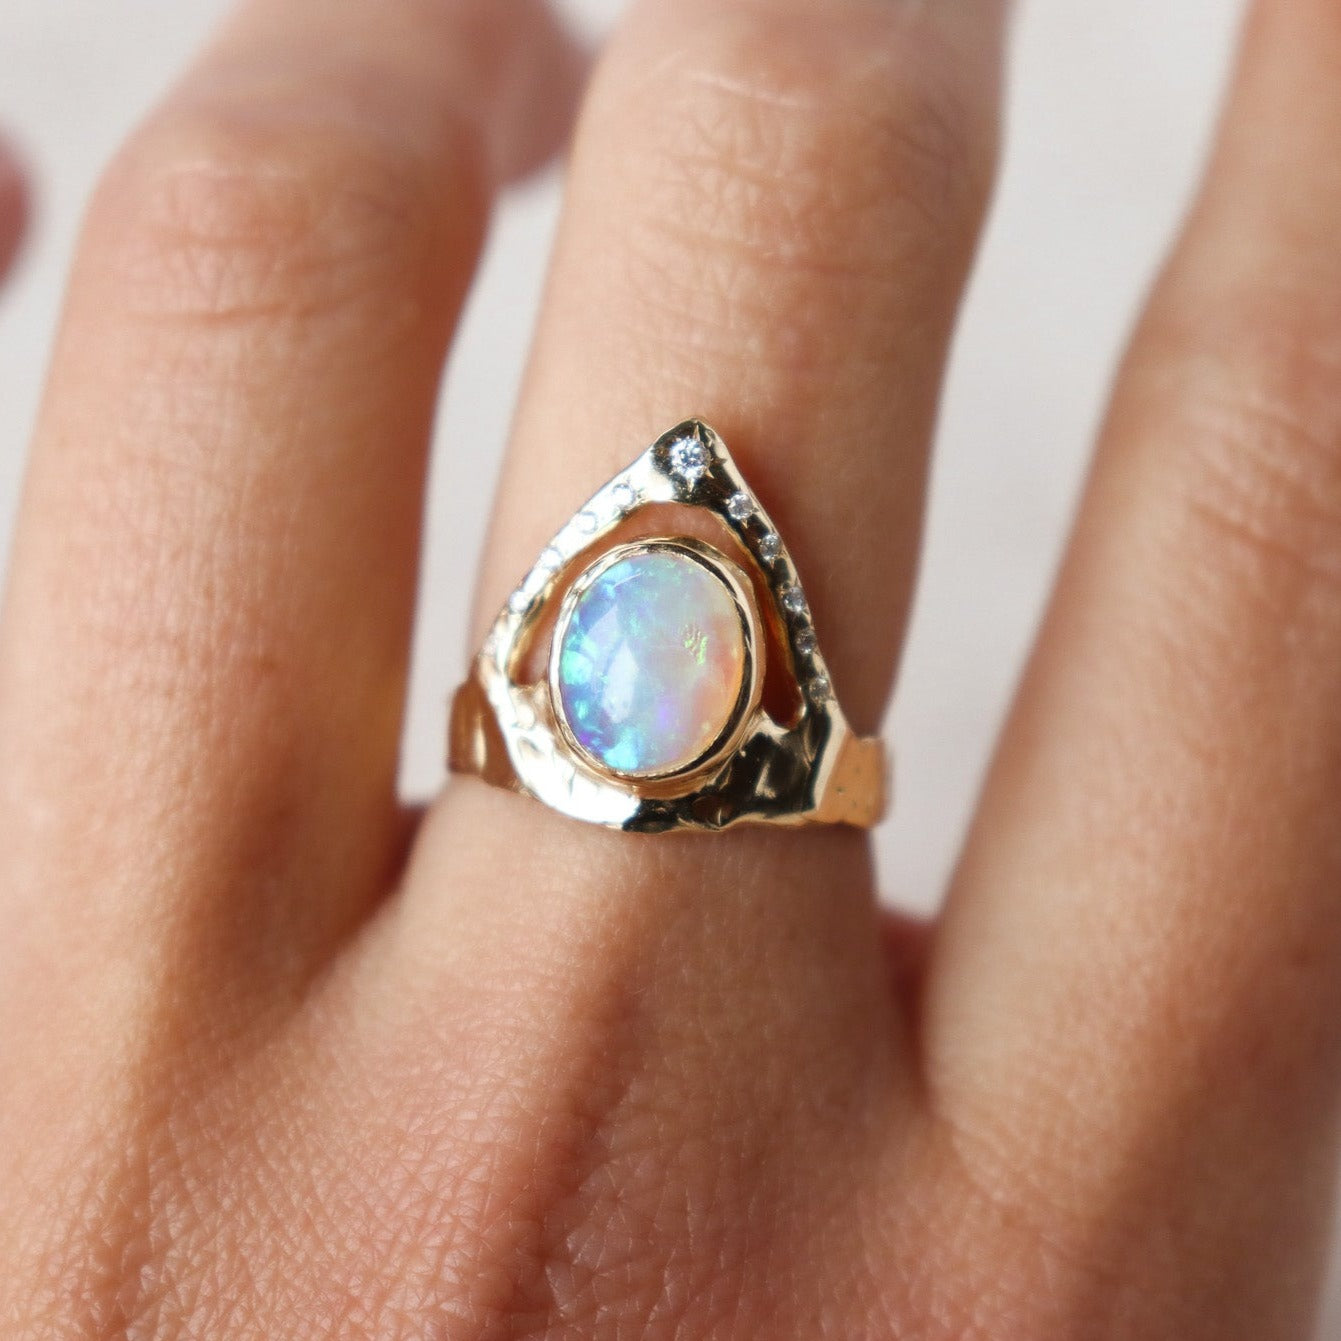 A ring featuring a bezel-set opal on a wide, organically shaped band, adorned with a crown-like V-shaped band encircling the opal and embellished with glistening diamond accents, shown on  a finger  for scale